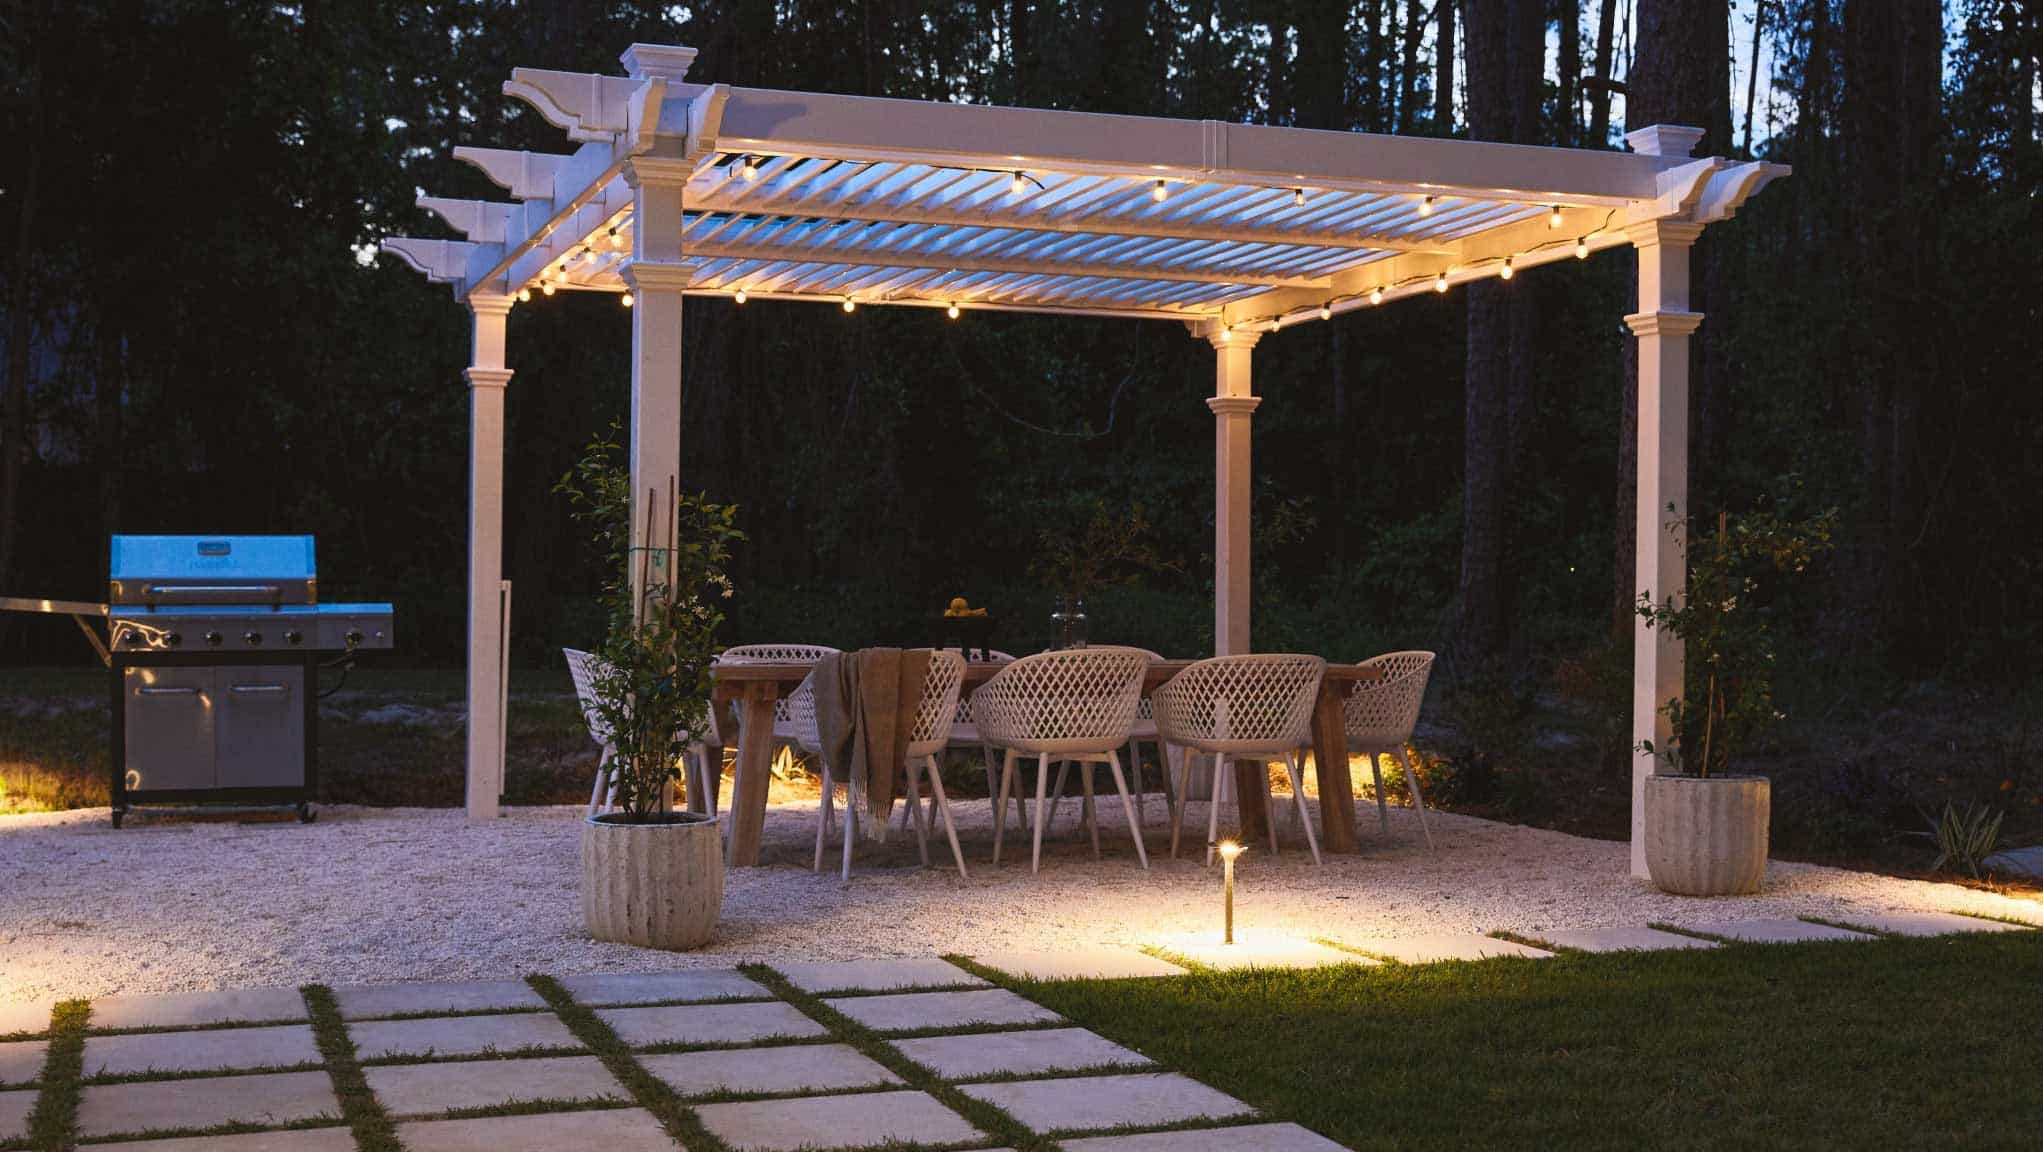 Backyard at night with pergola-covered dining area with string lights